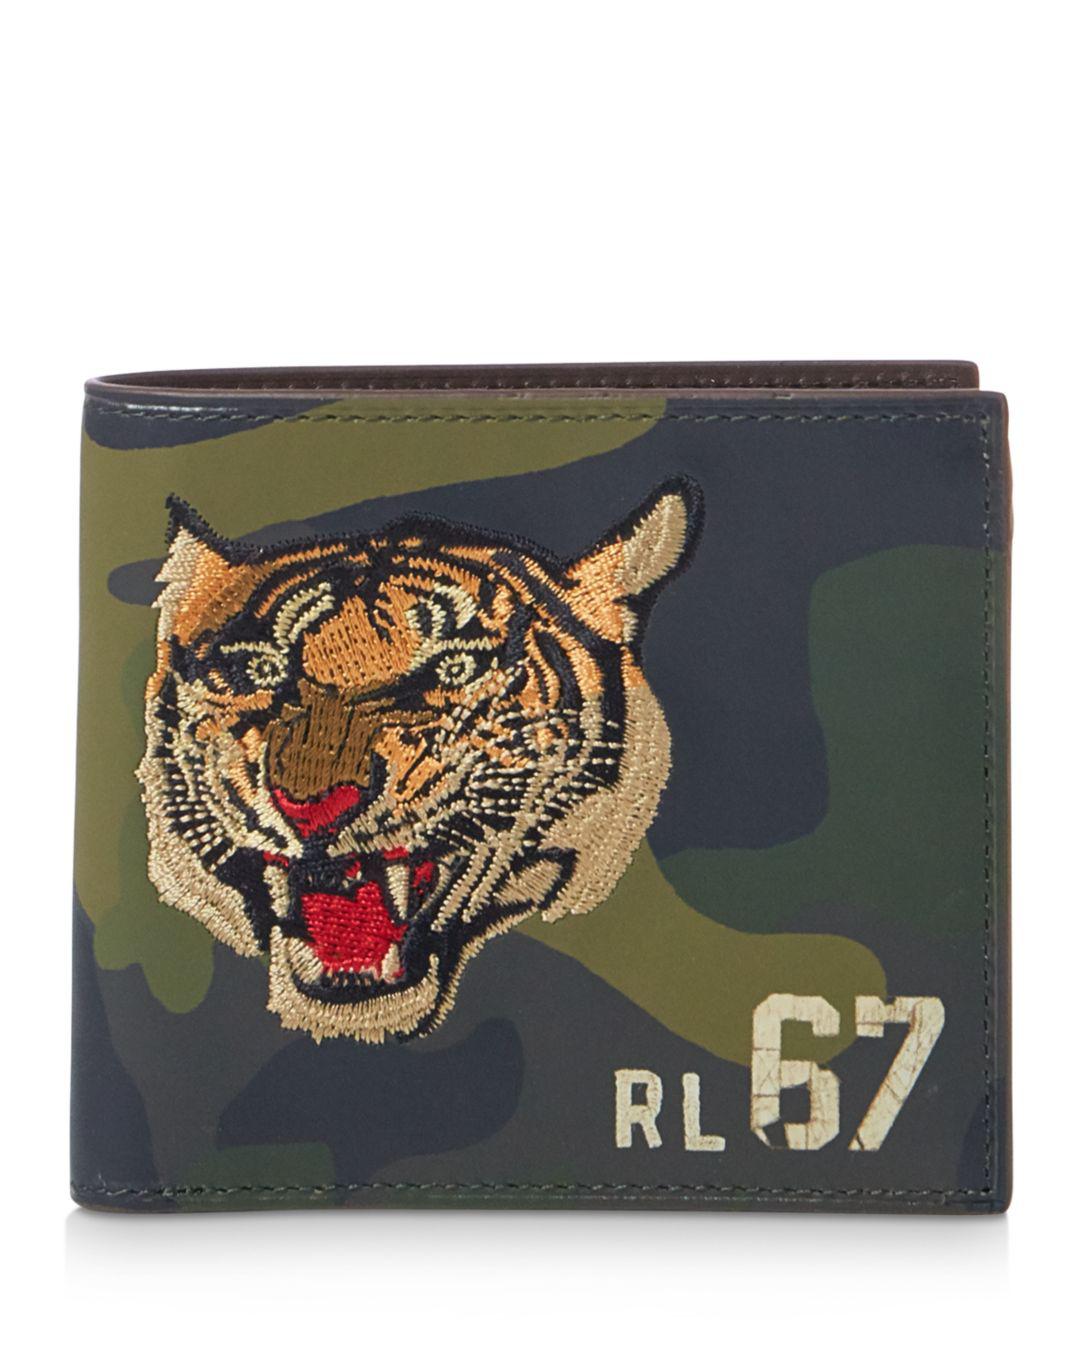 Polo Ralph Lauren Camouflage Tiger Leather Wallet in Green for Men - Lyst